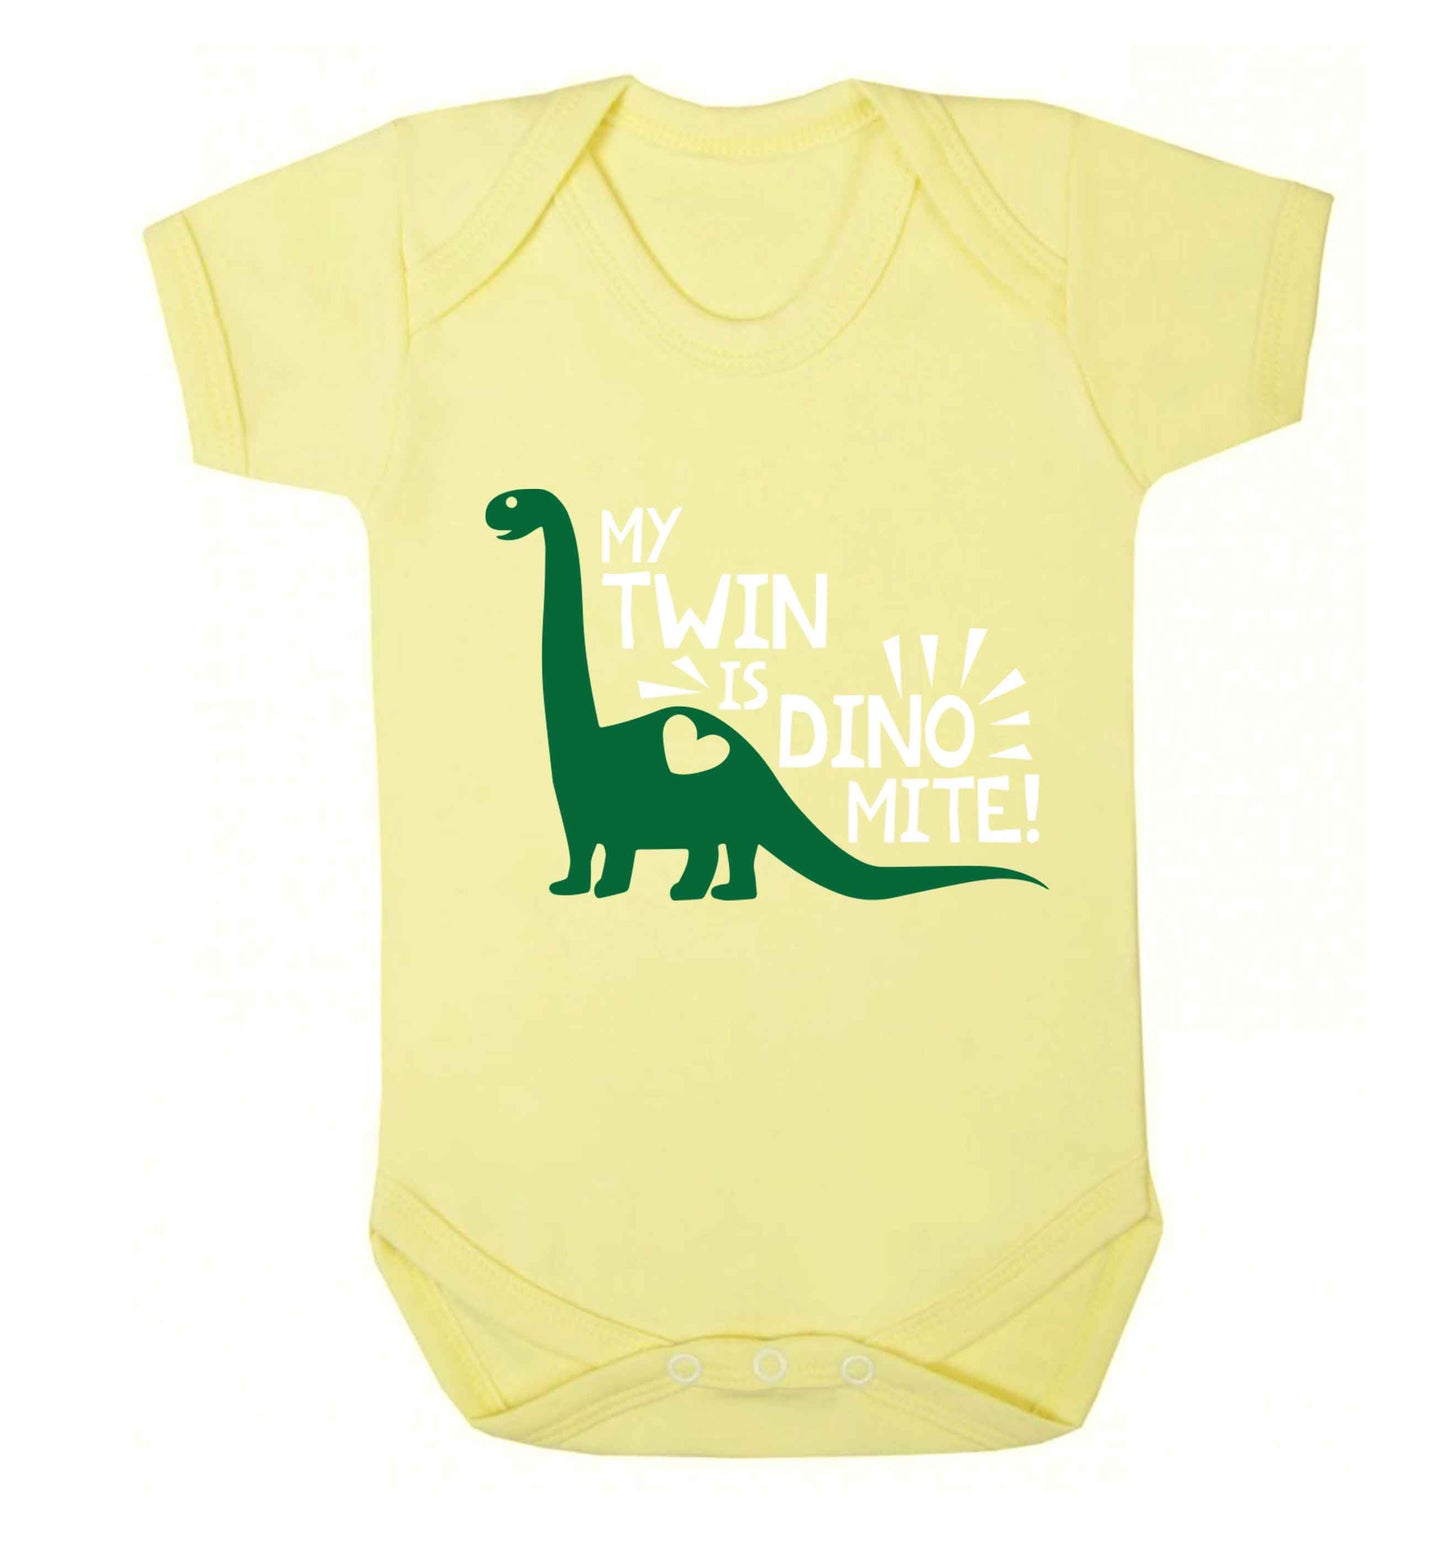 My twin is dinomite! Baby Vest pale yellow 18-24 months